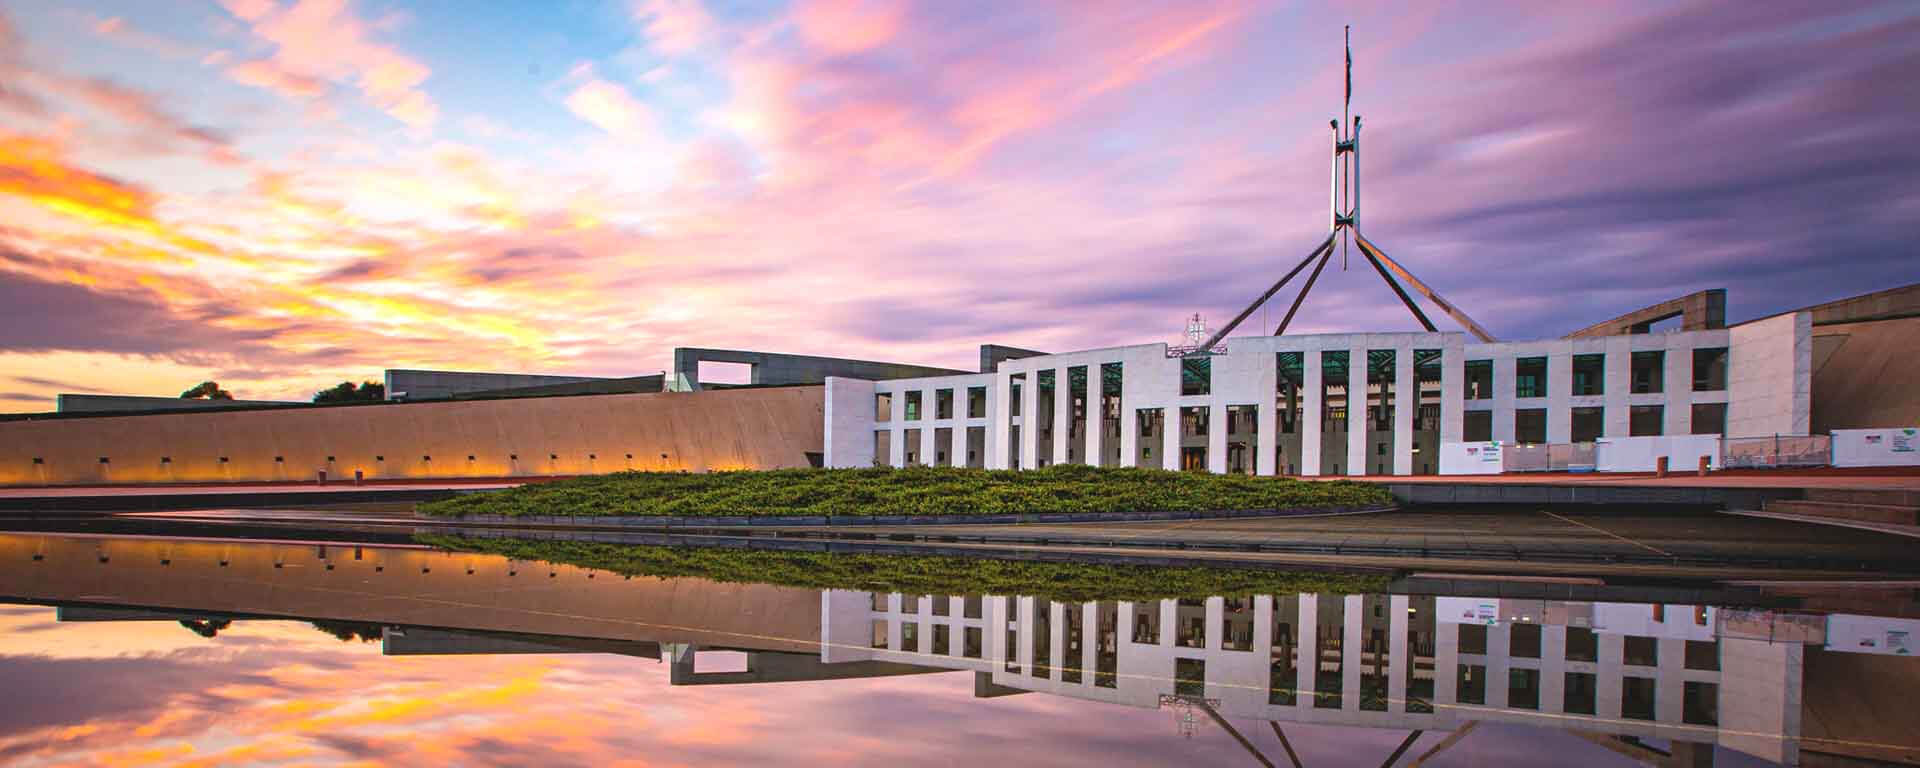 Canberra Tour Packages